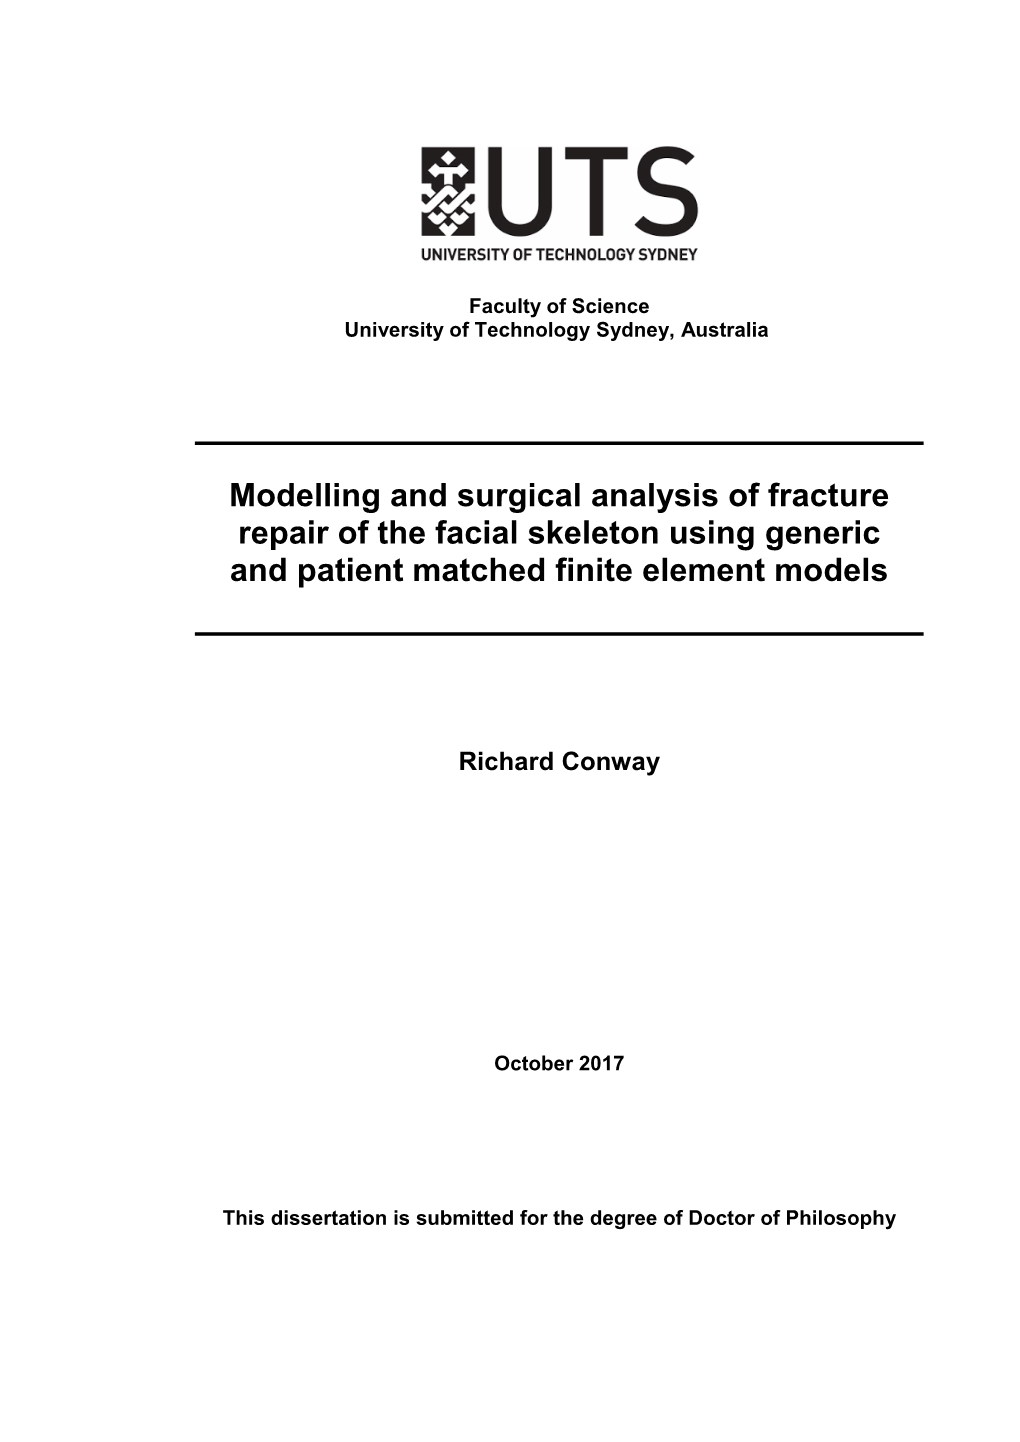 Modelling and Surgical Analysis of Fracture Repair of the Facial Skeleton Using Generic and Patient Matched Finite Element Models